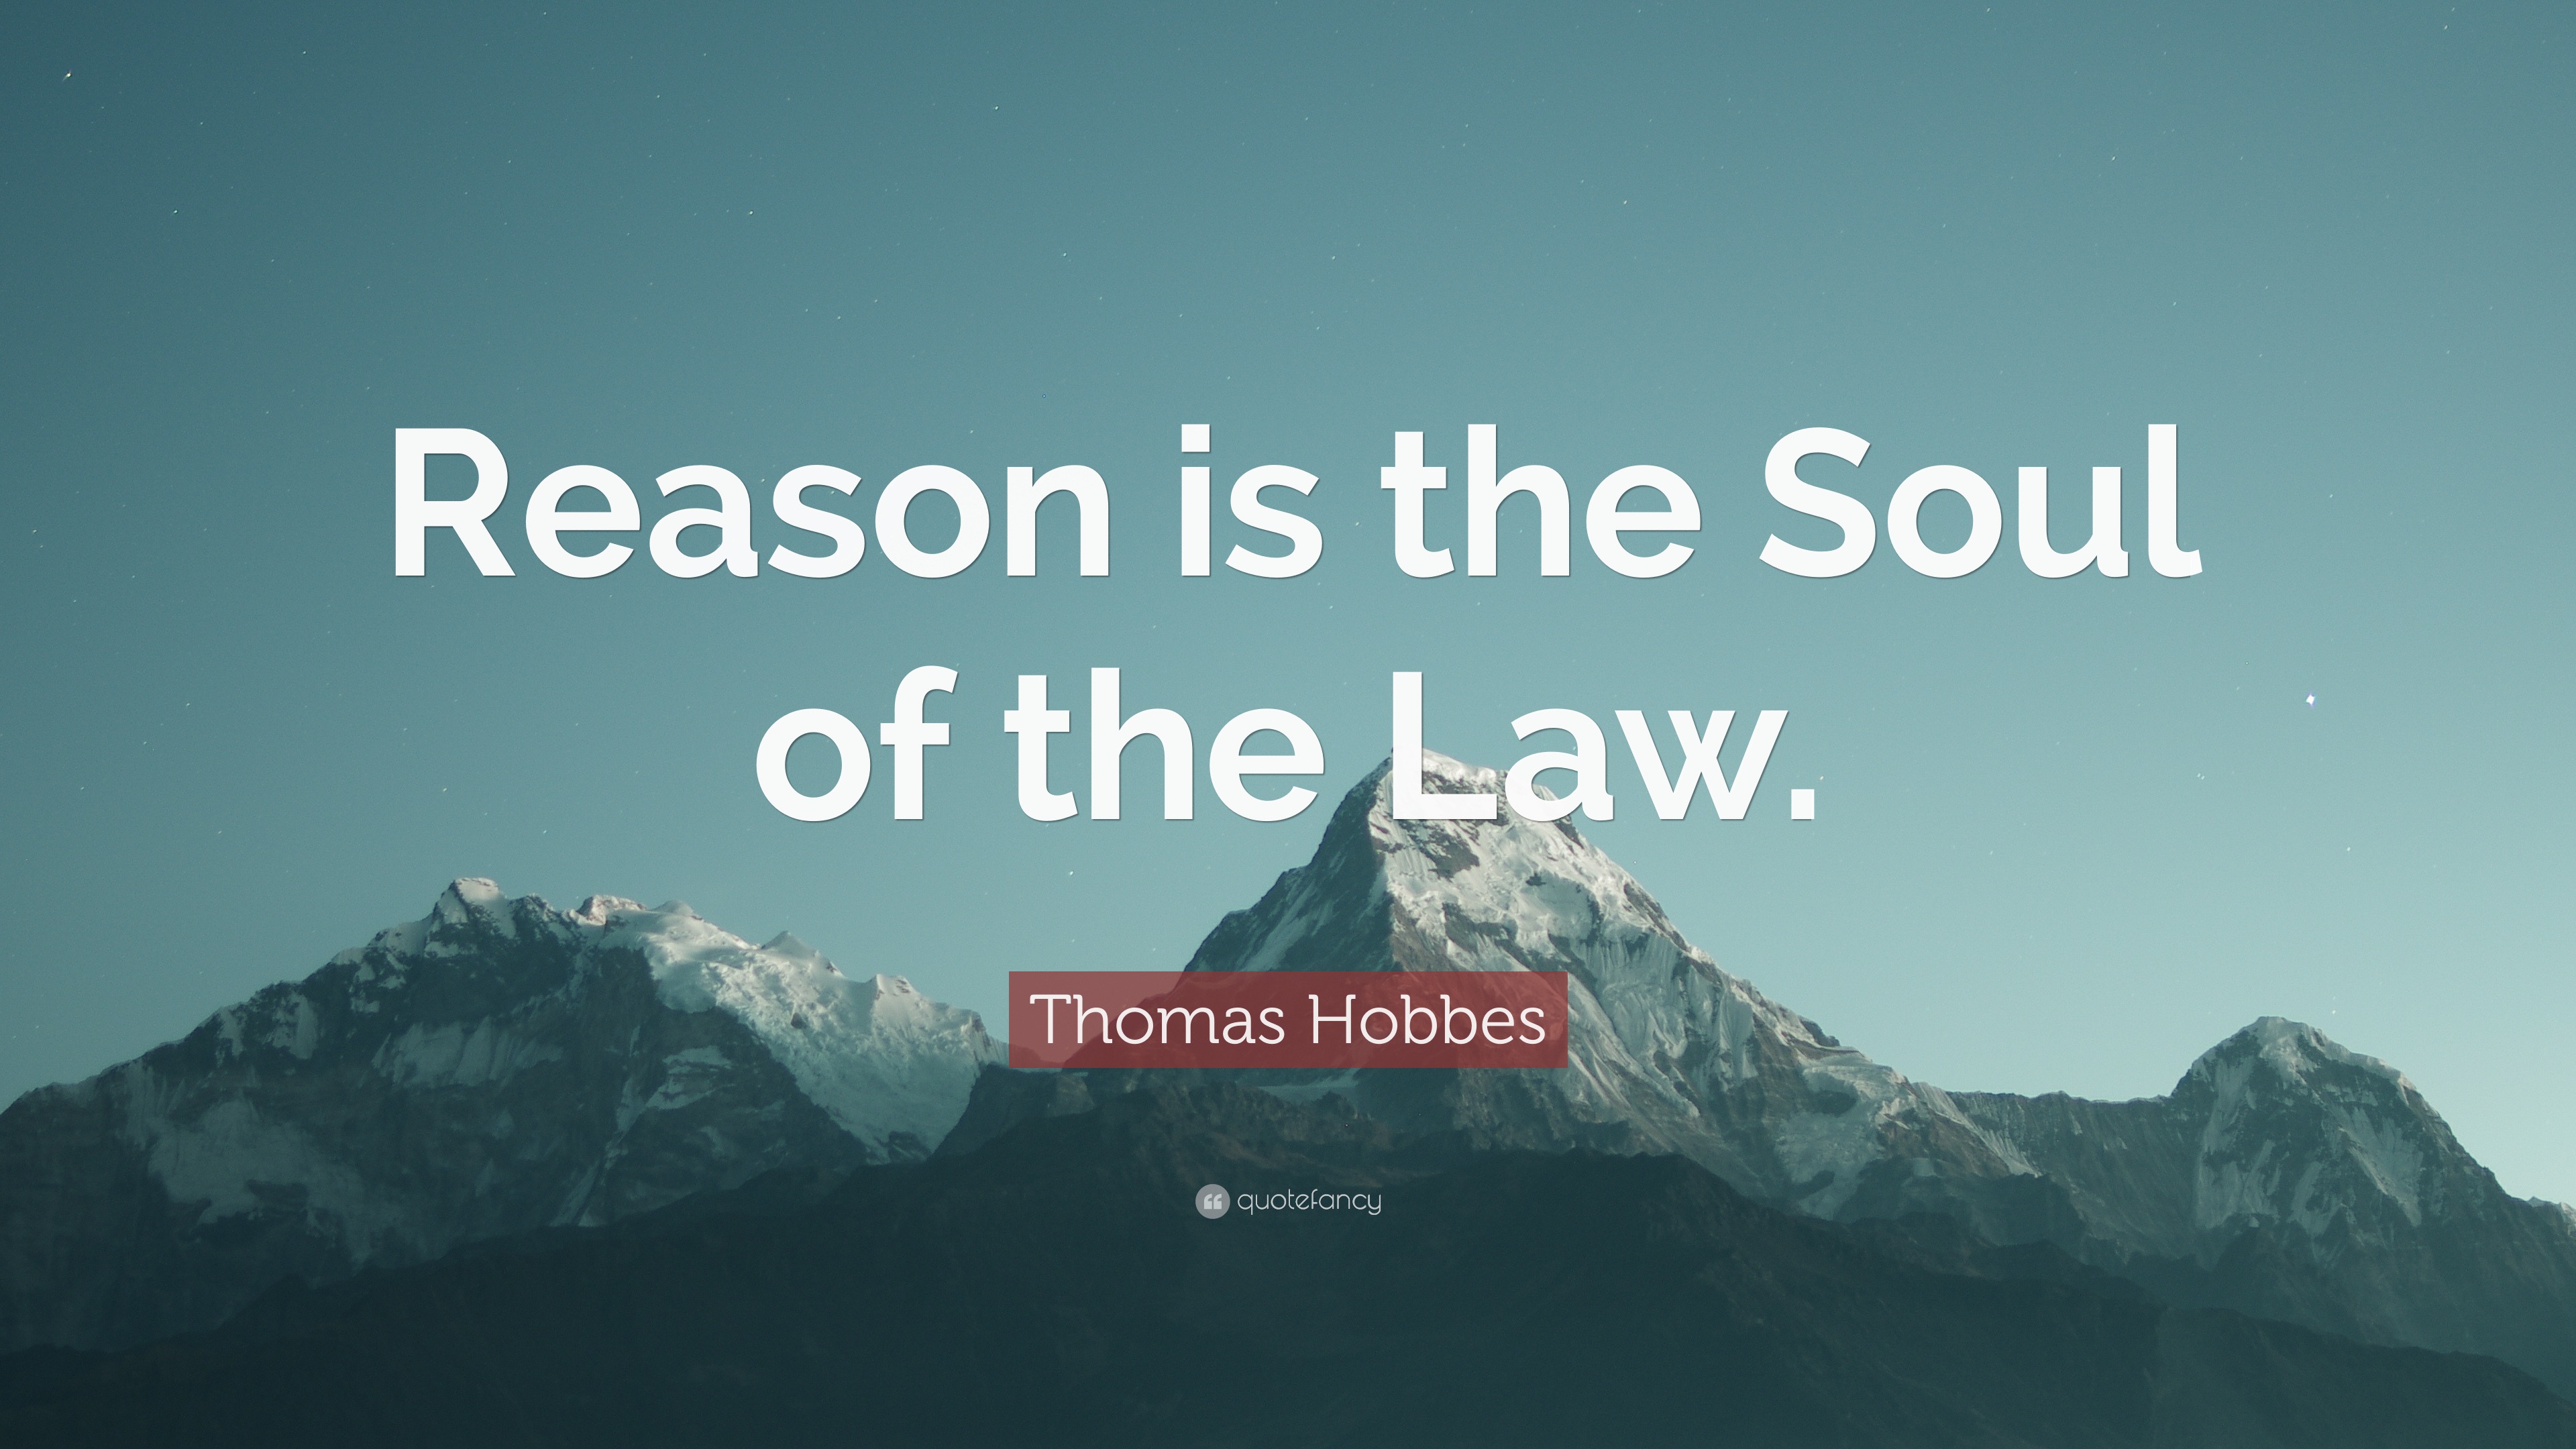 Thomas Hobbes Quote: “Reason is the Soul of the Law.”